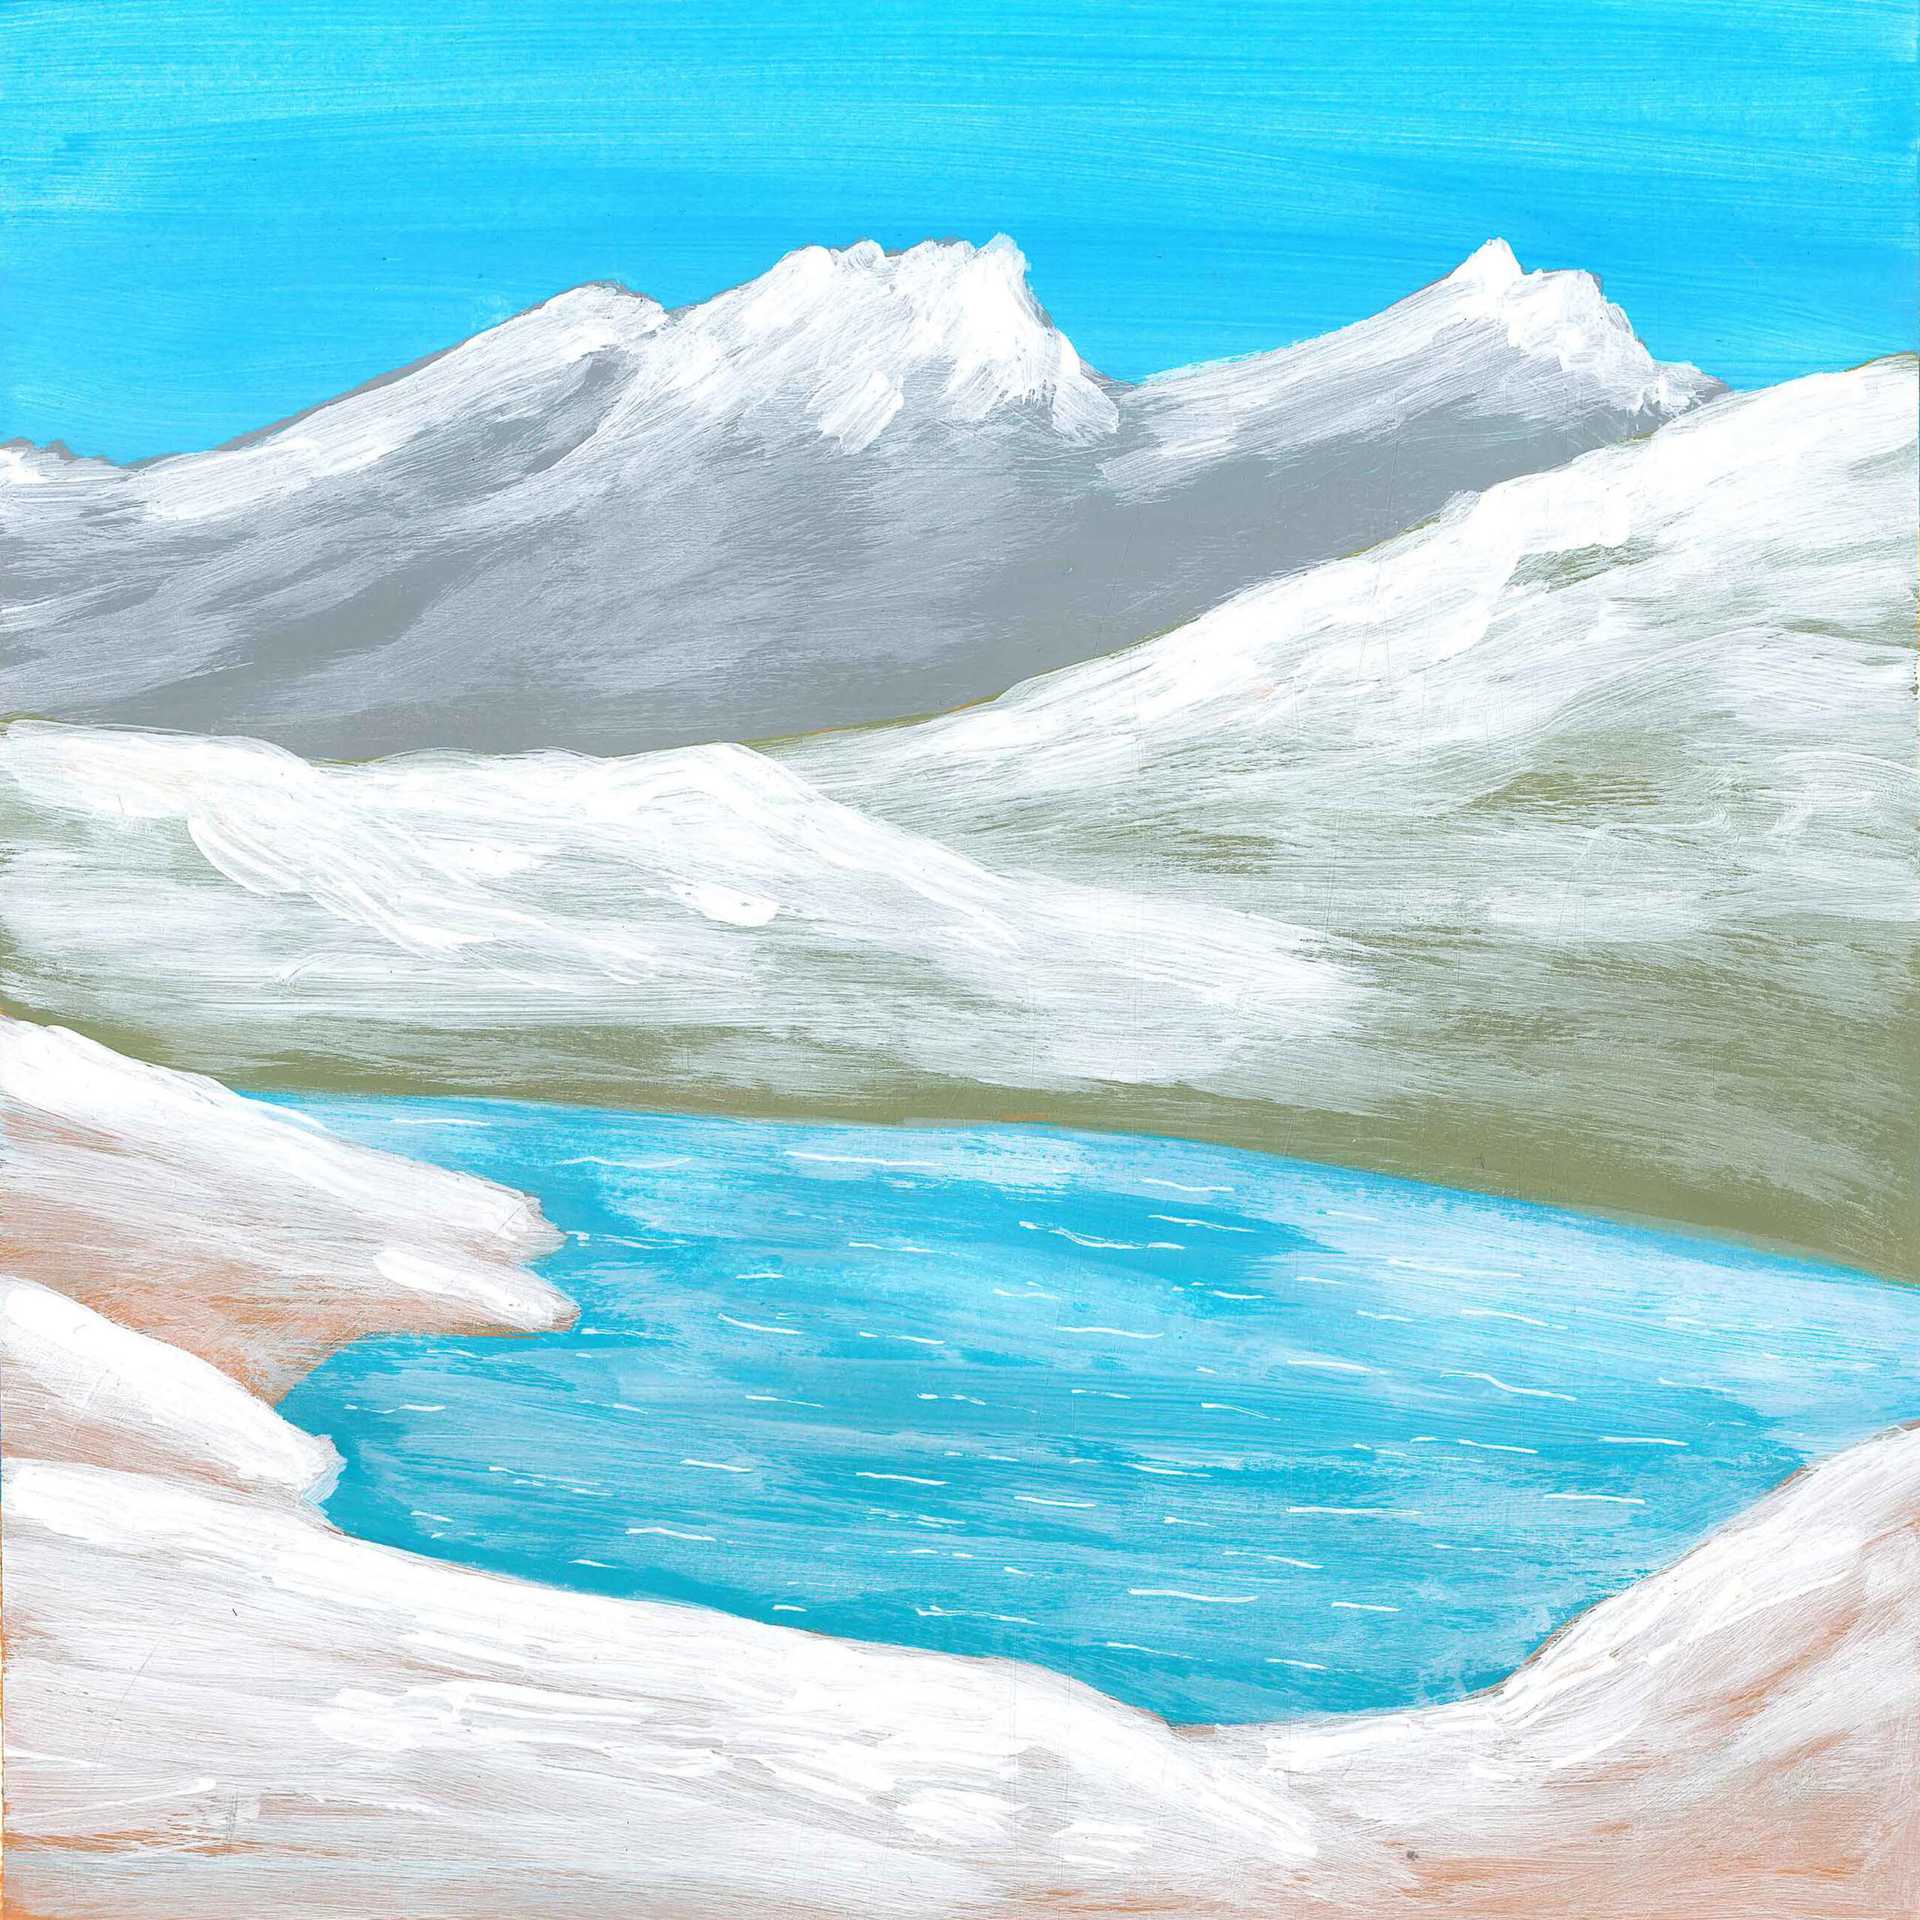 Ice on Graubünden Lake - nature landscape painting - earth.fm